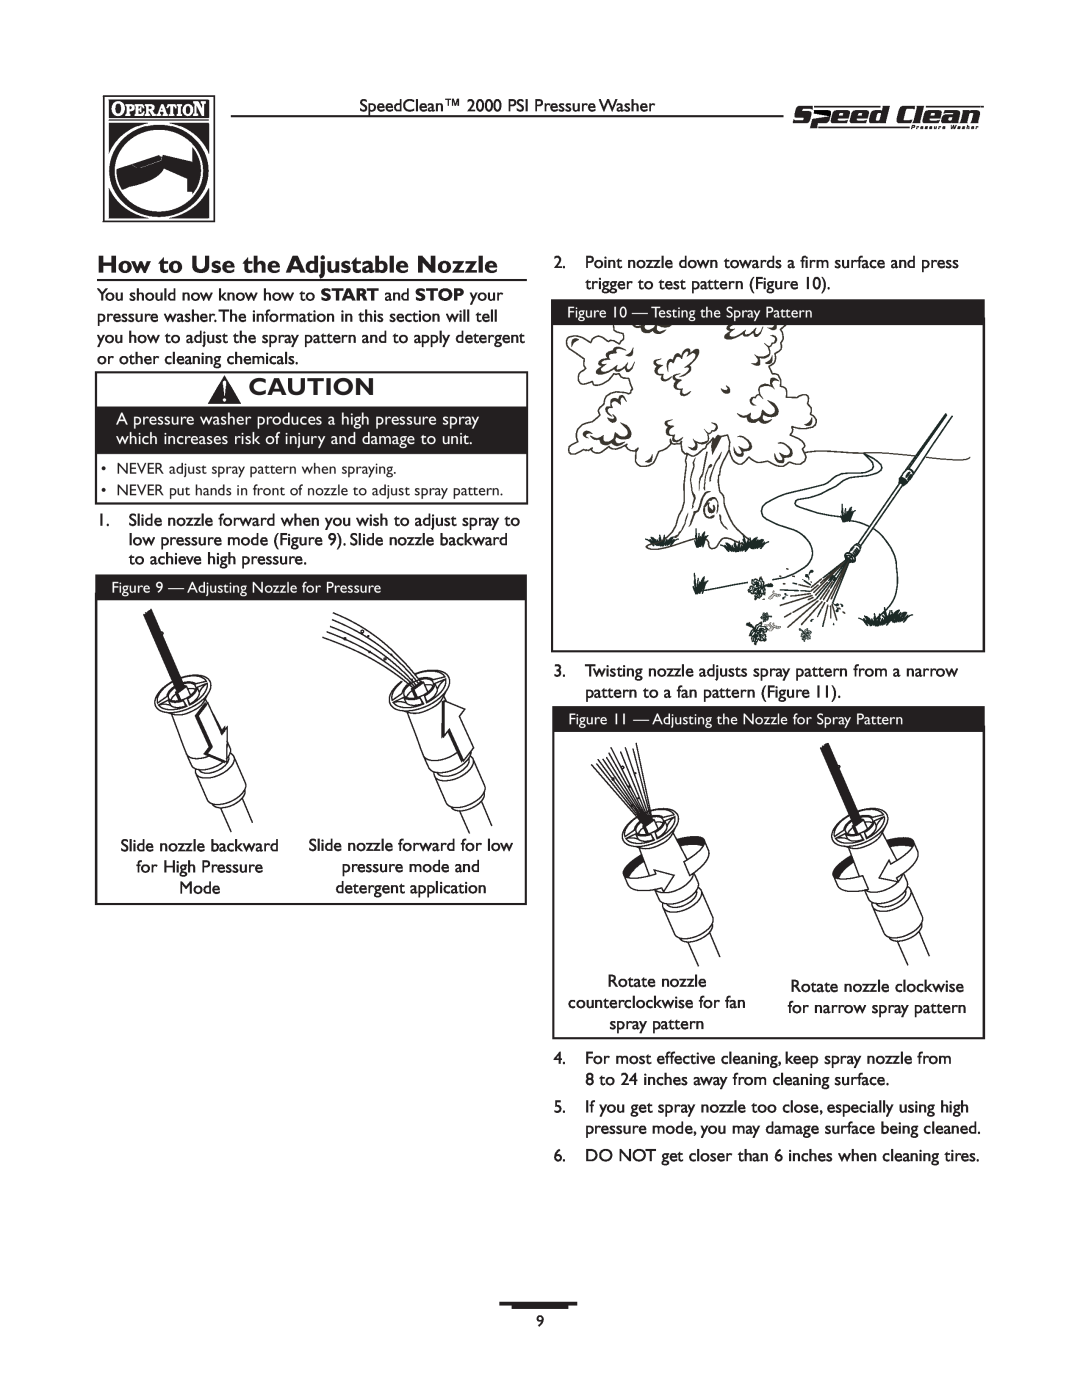 Briggs & Stratton 020211-0 owner manual How to Use the Adjustable Nozzle 